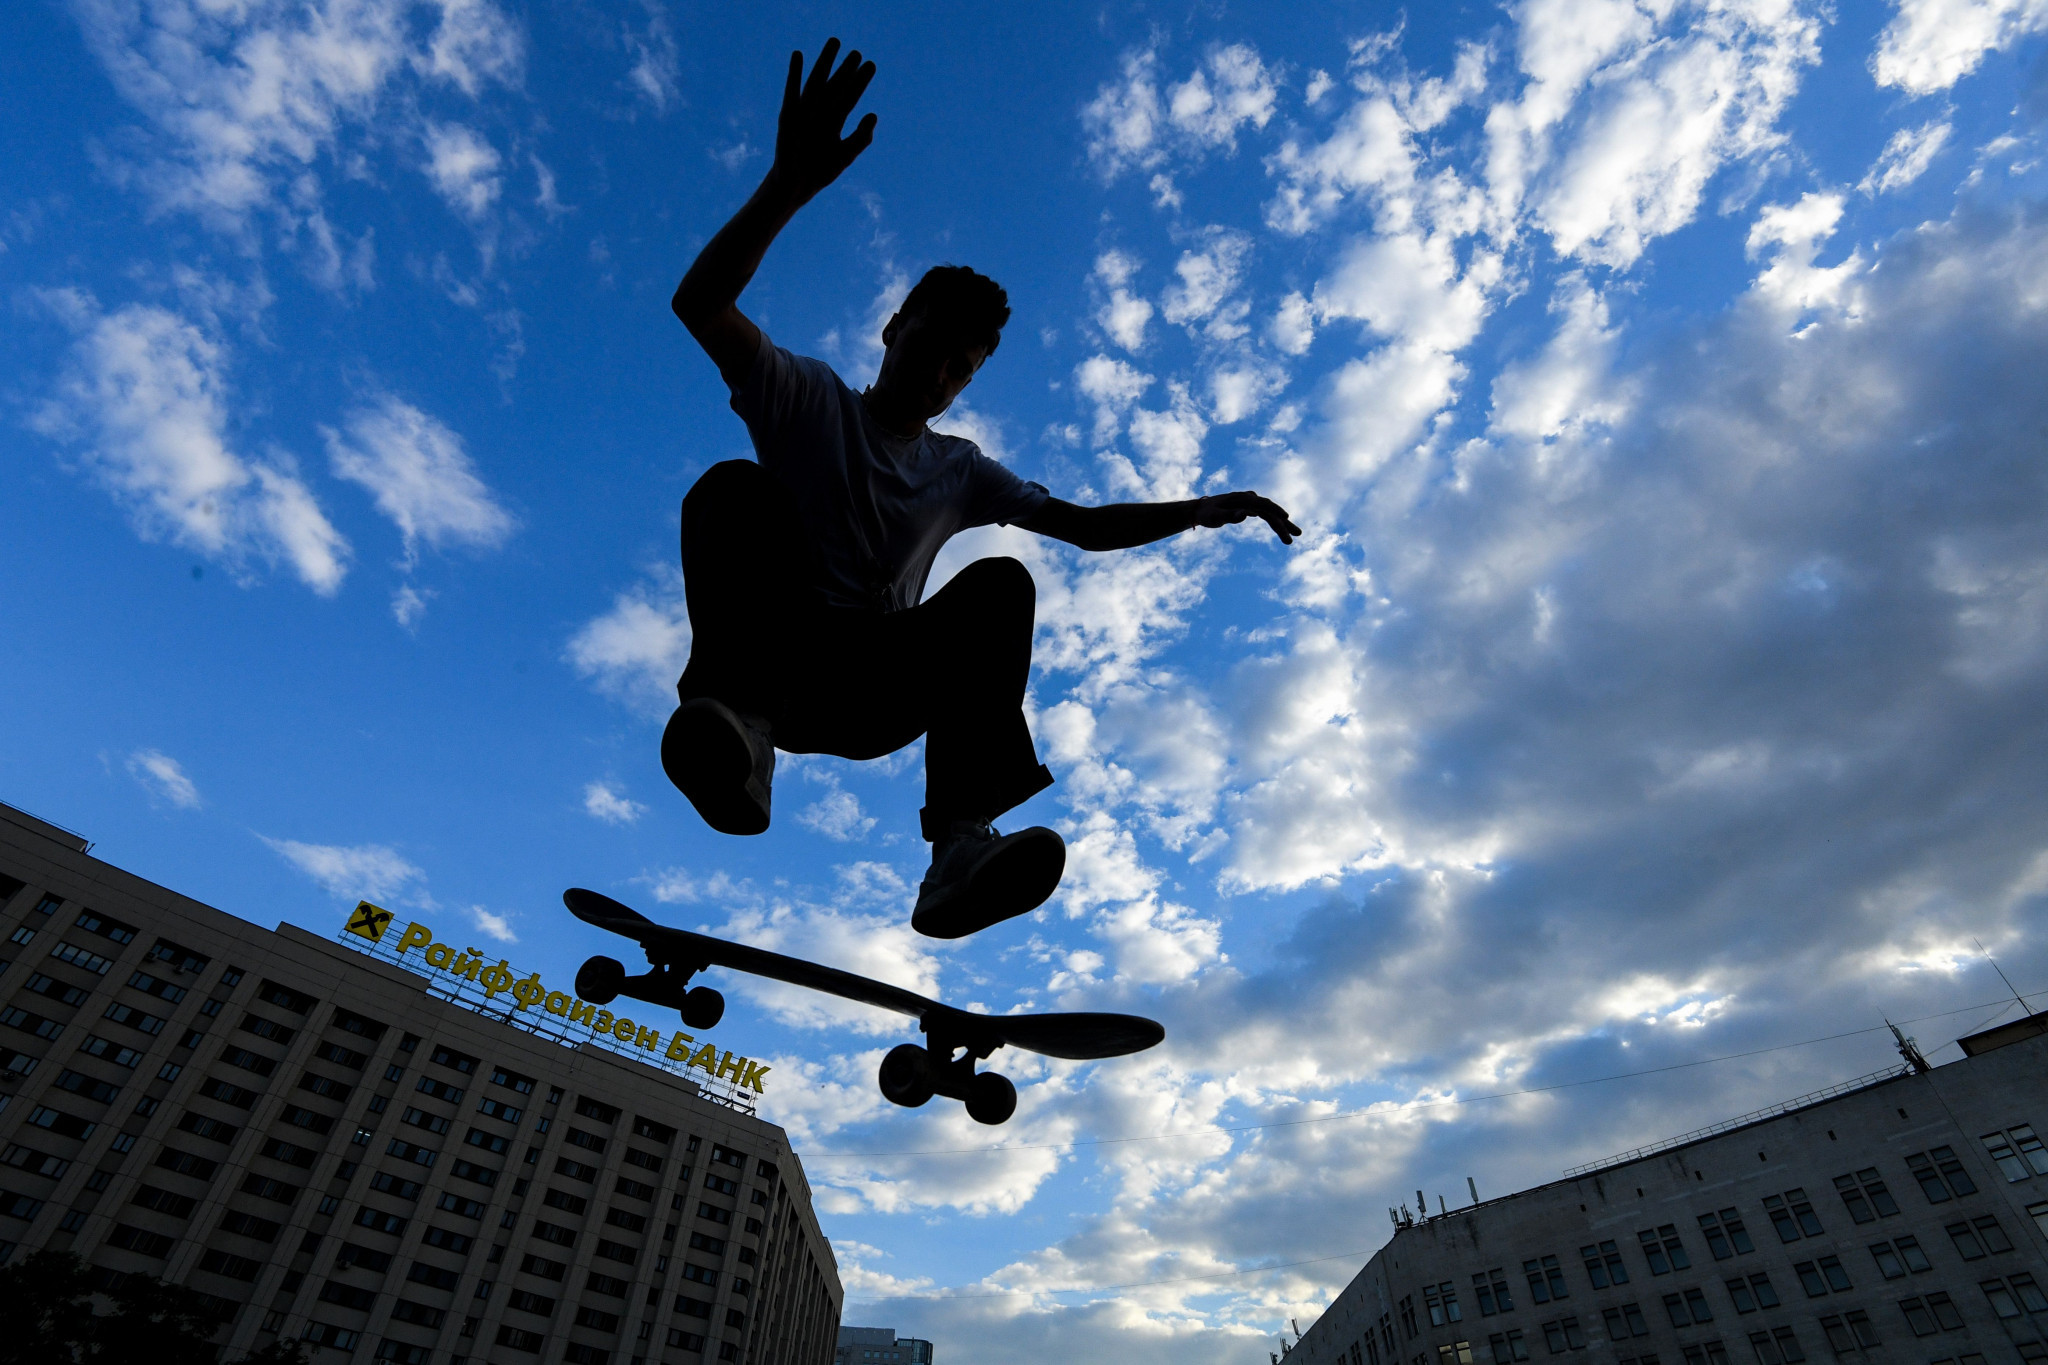 Exclusive: USOPC to hold call with athletes after plans revealed to decertify USA Skateboarding